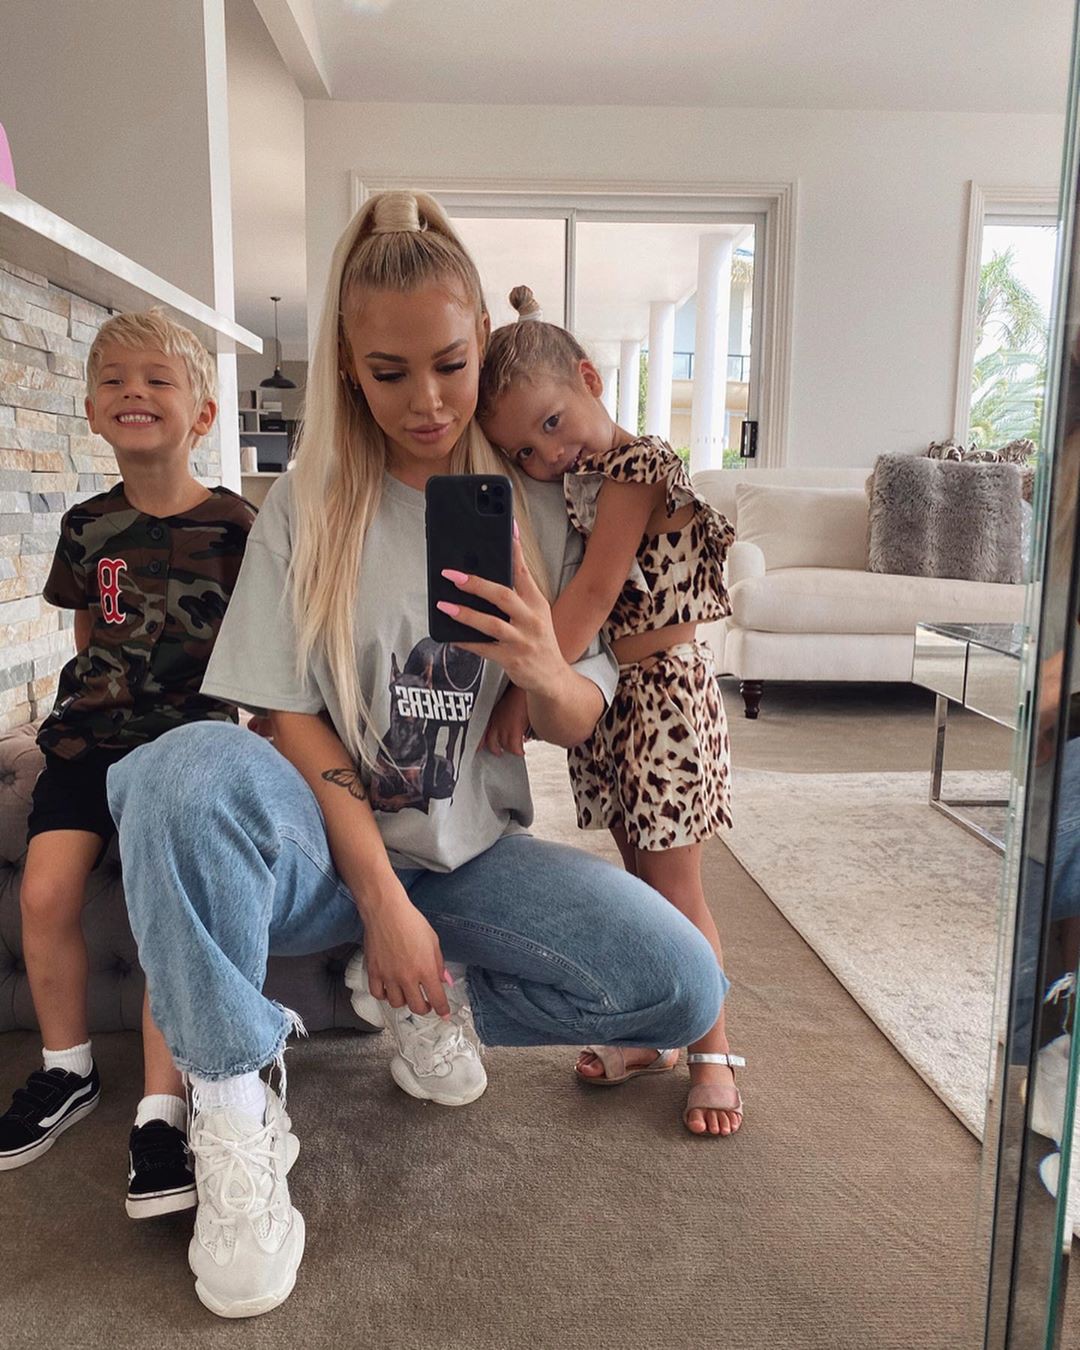 Mommy Tammy Hembrow Photography Instagram: Hot Instagram Models,  instagram profile picture,  most liked Instagram photo,  Instagram pictures,  hottest girls on Instagram,  Tammy Hembrow,  Instagram Tammy Hembrow  